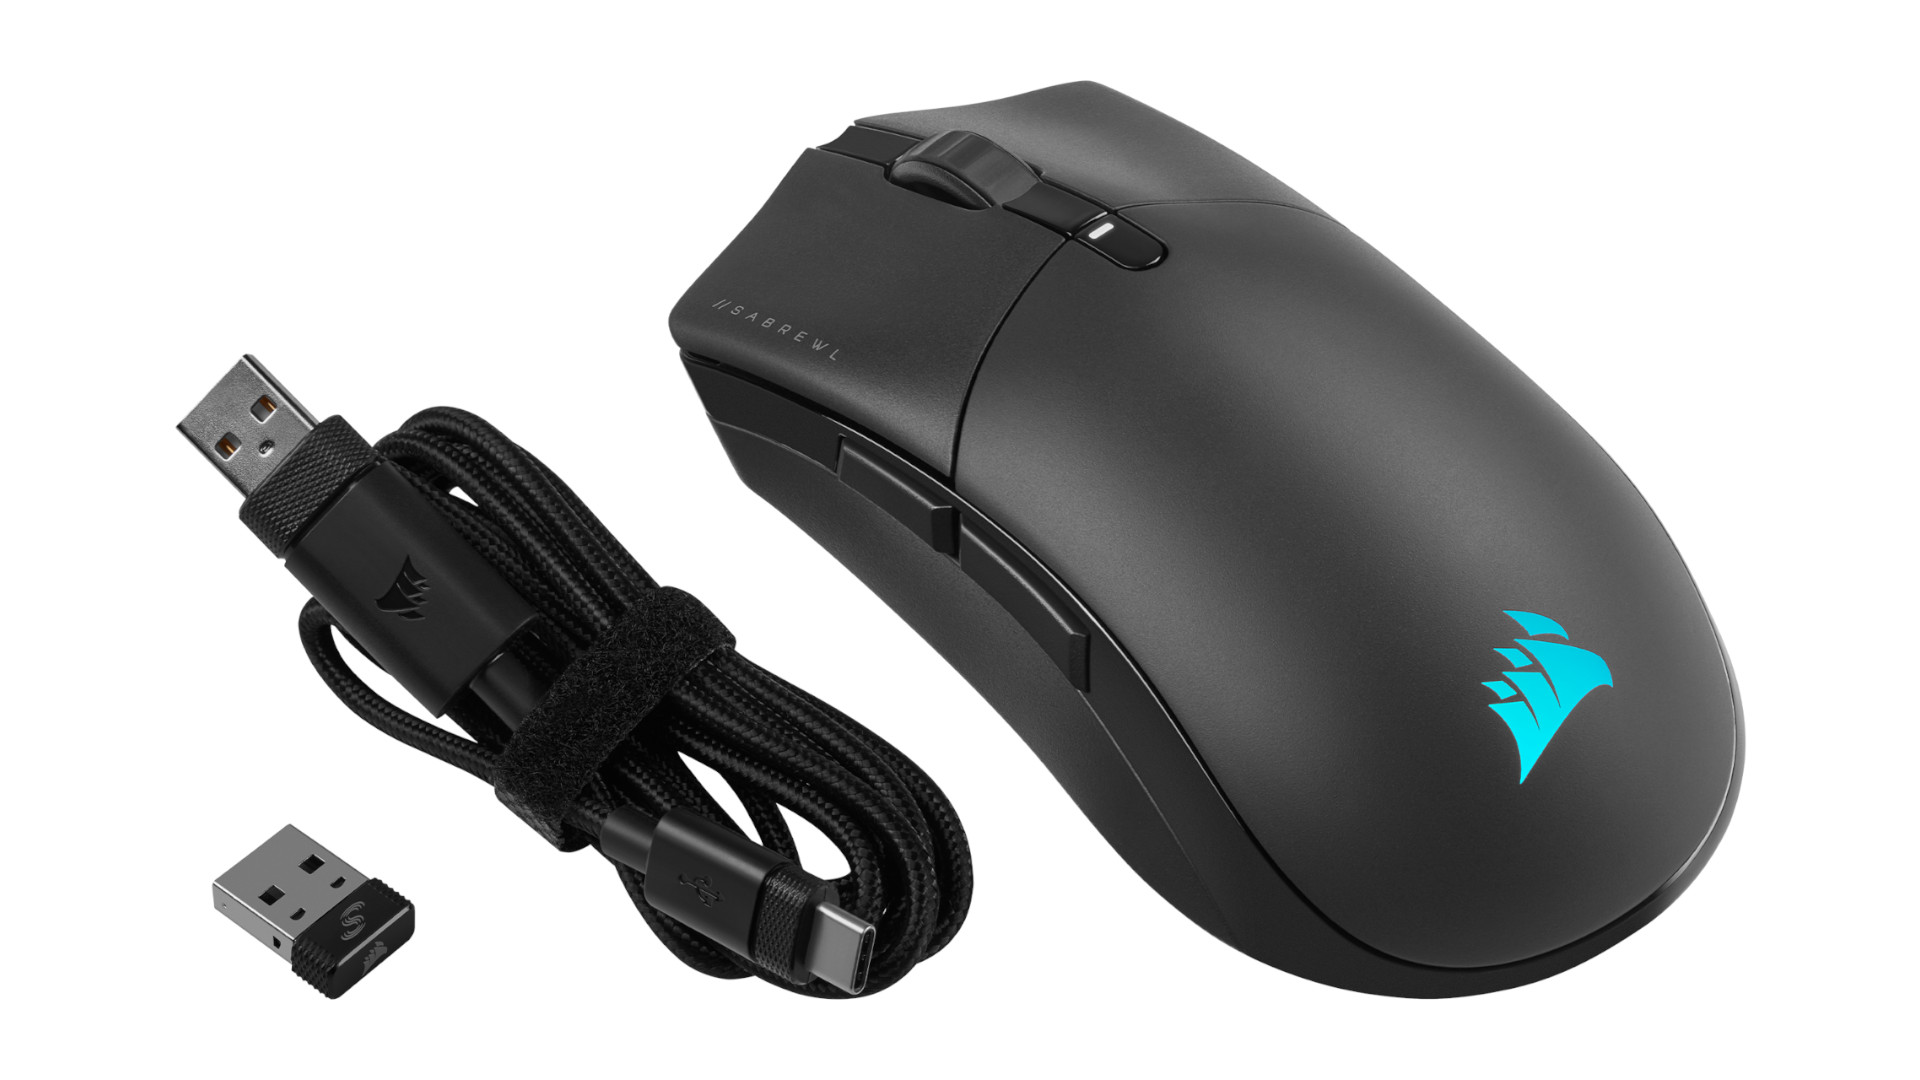 The Corsair Sabre RGB Pro Wireless gaming mouse, next to its USB-C to USB-A charging cable and Slipstream wireless USB-A receiver